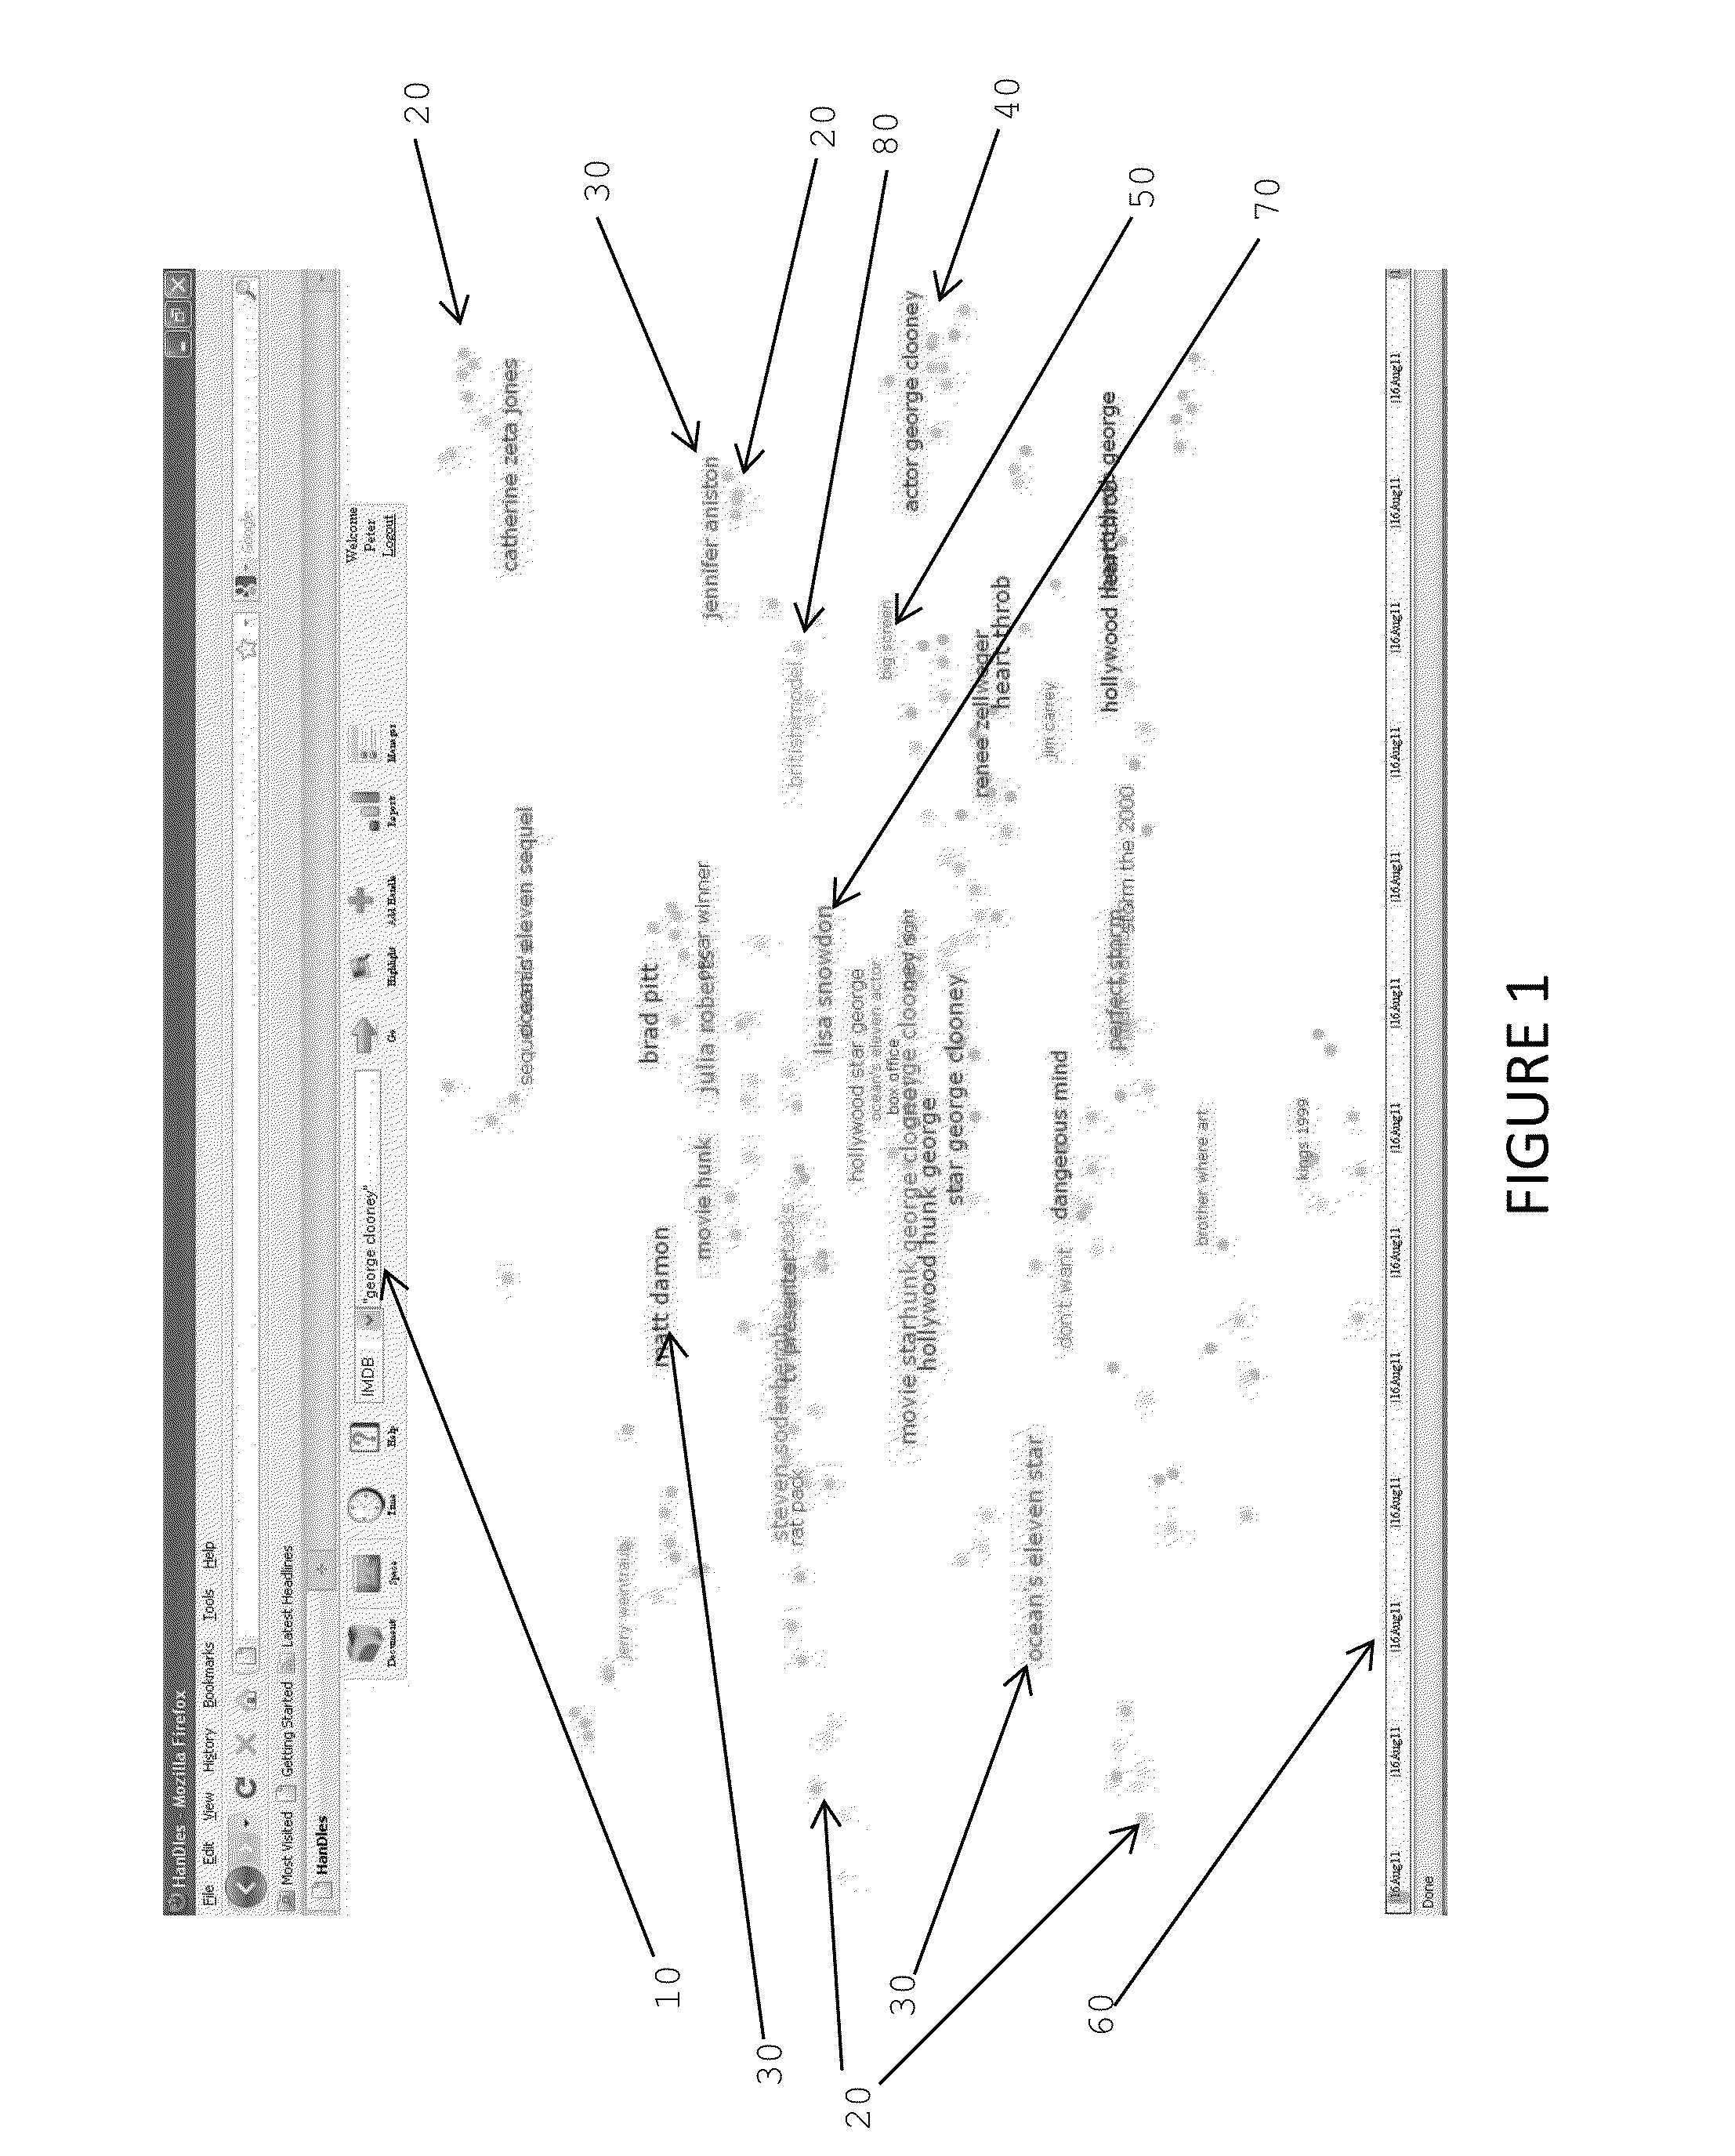 Method for Displaying Search Results